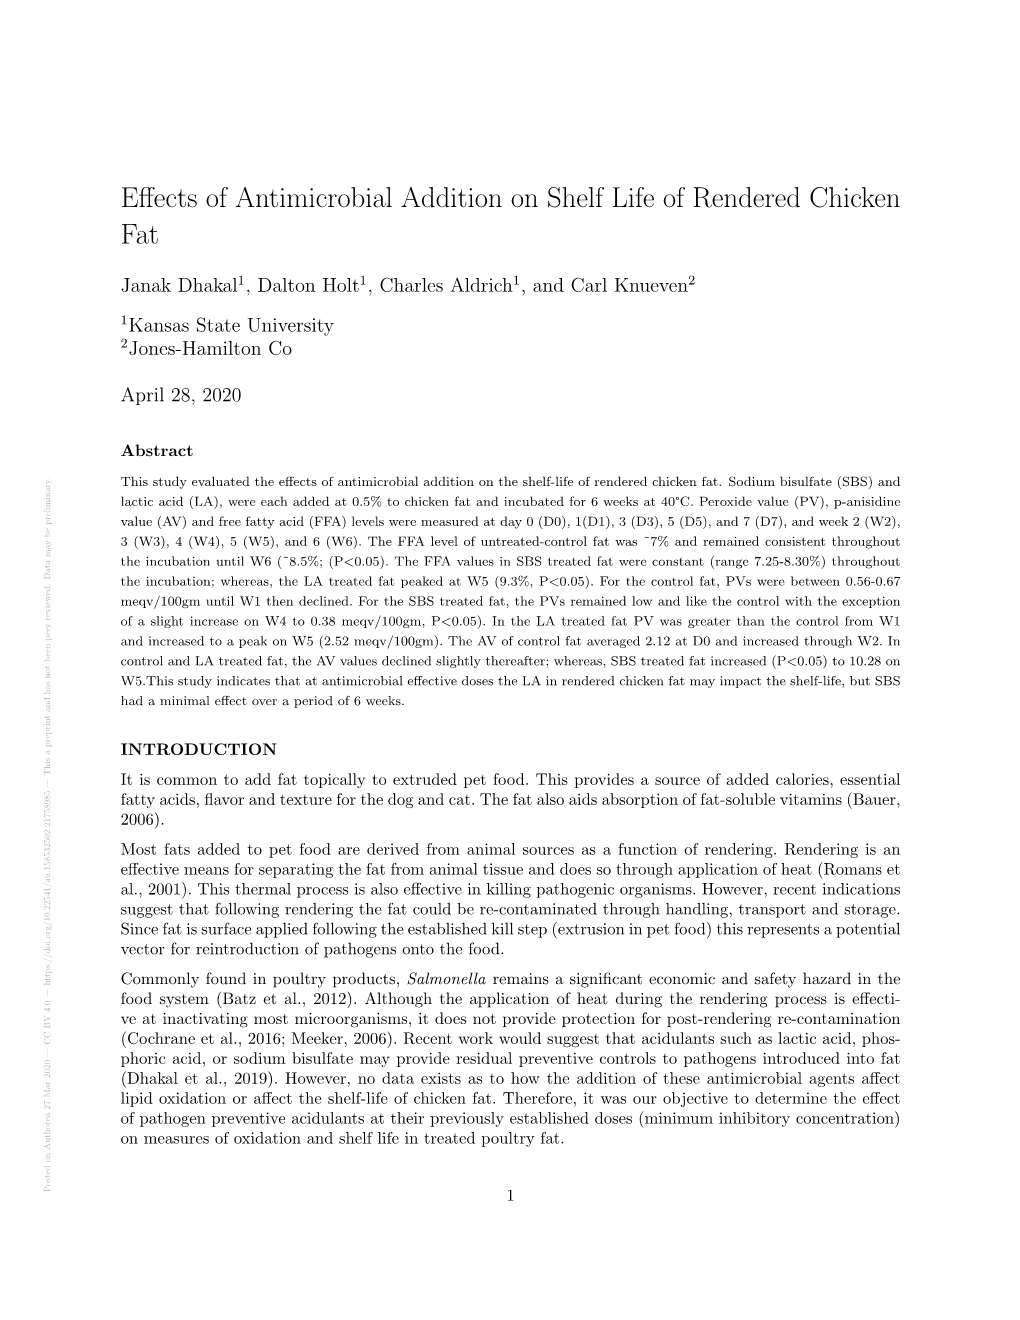 Effects of Antimicrobial Addition on Shelf Life of Rendered Chicken